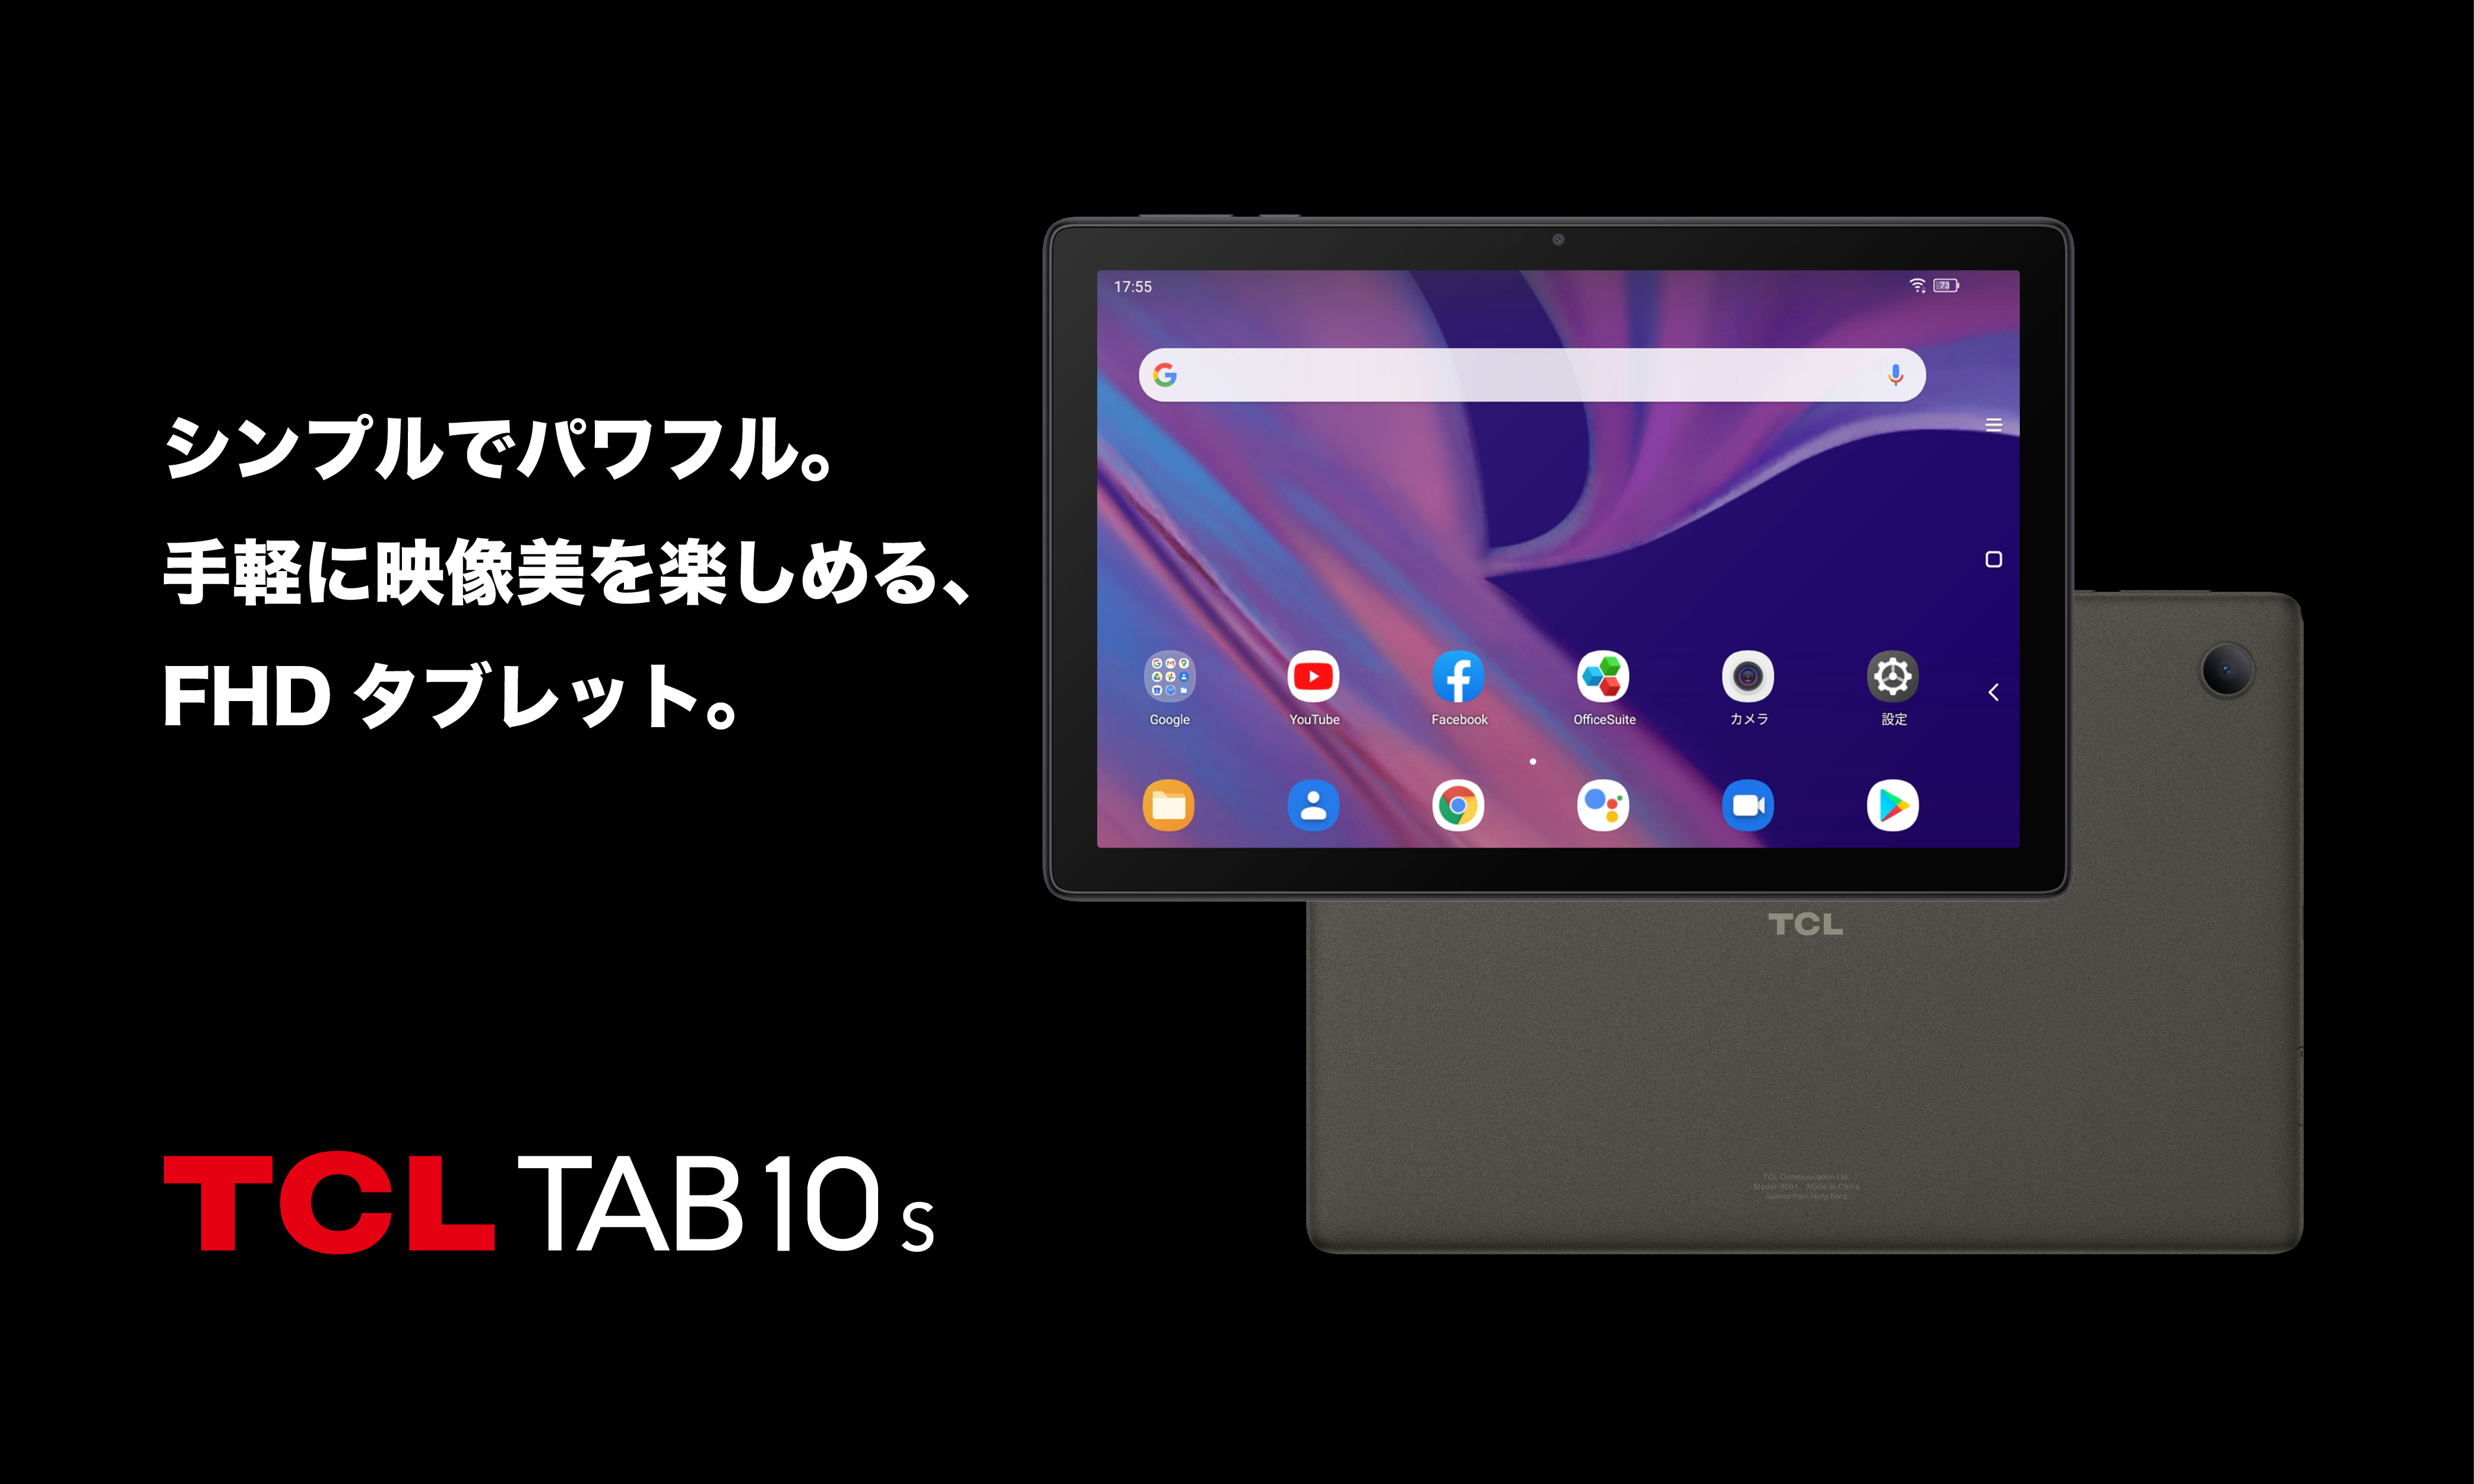 TCL 10s 9061 タブレット